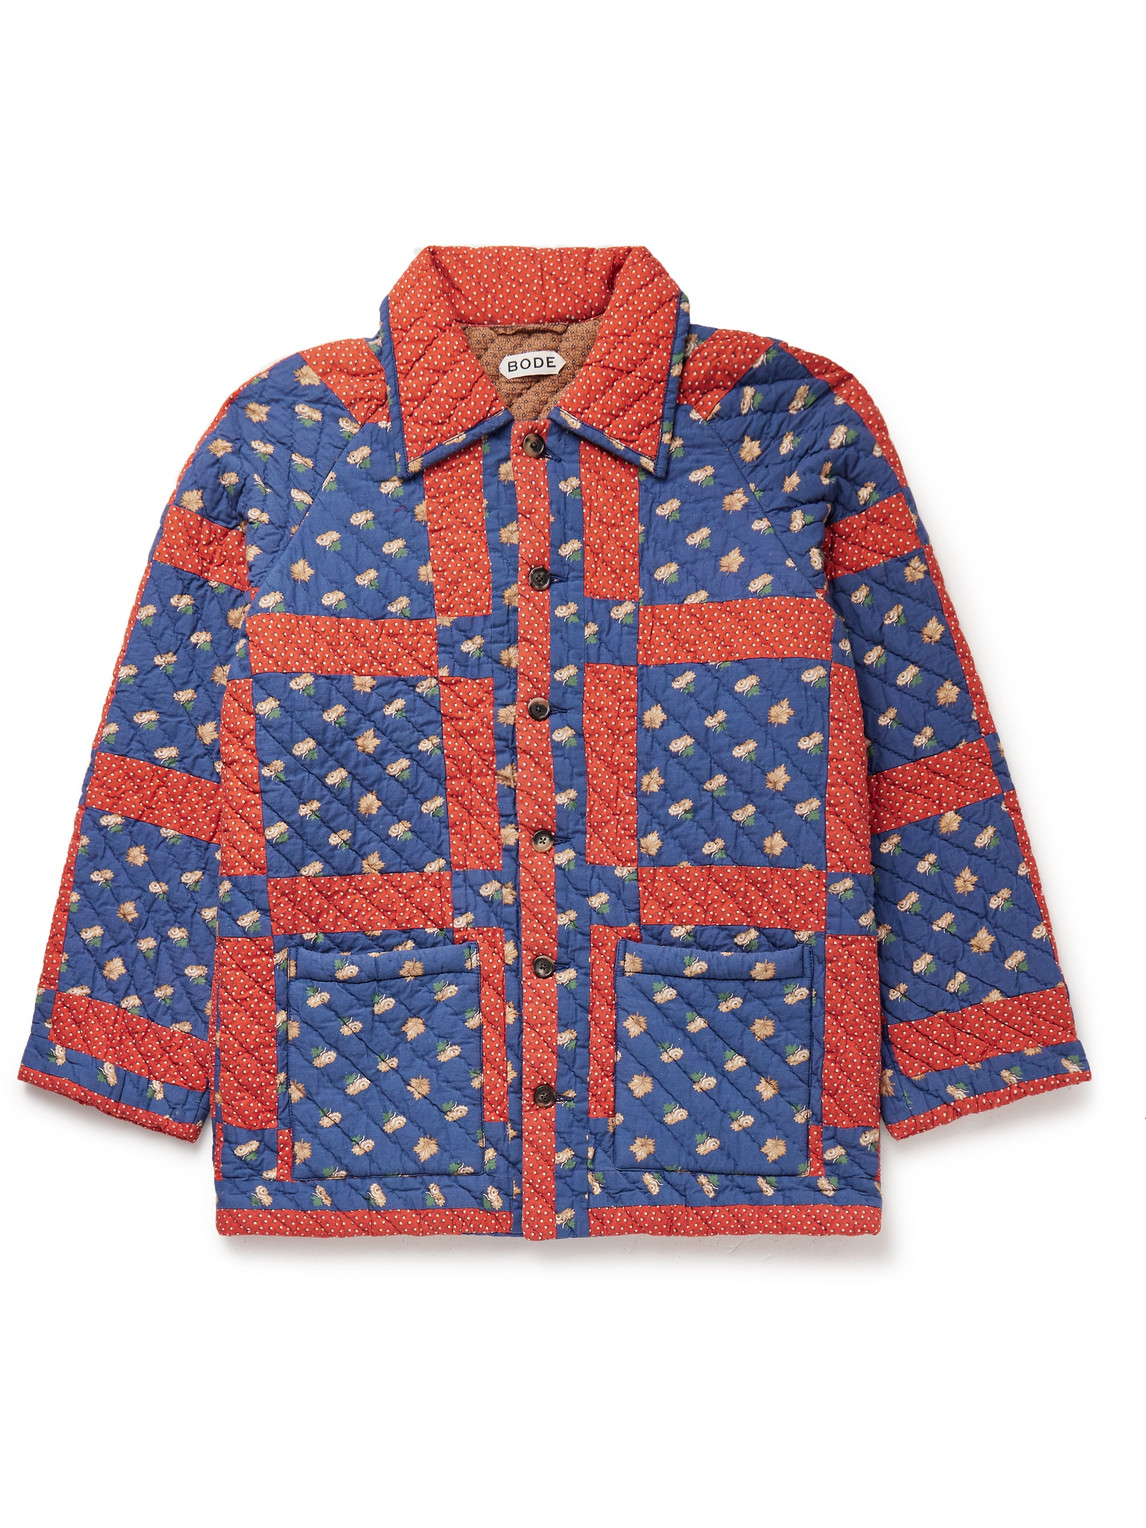 BODE - Sheepfold Quilted Padded Printed Cotton Jacket - Men - Blue - S von BODE